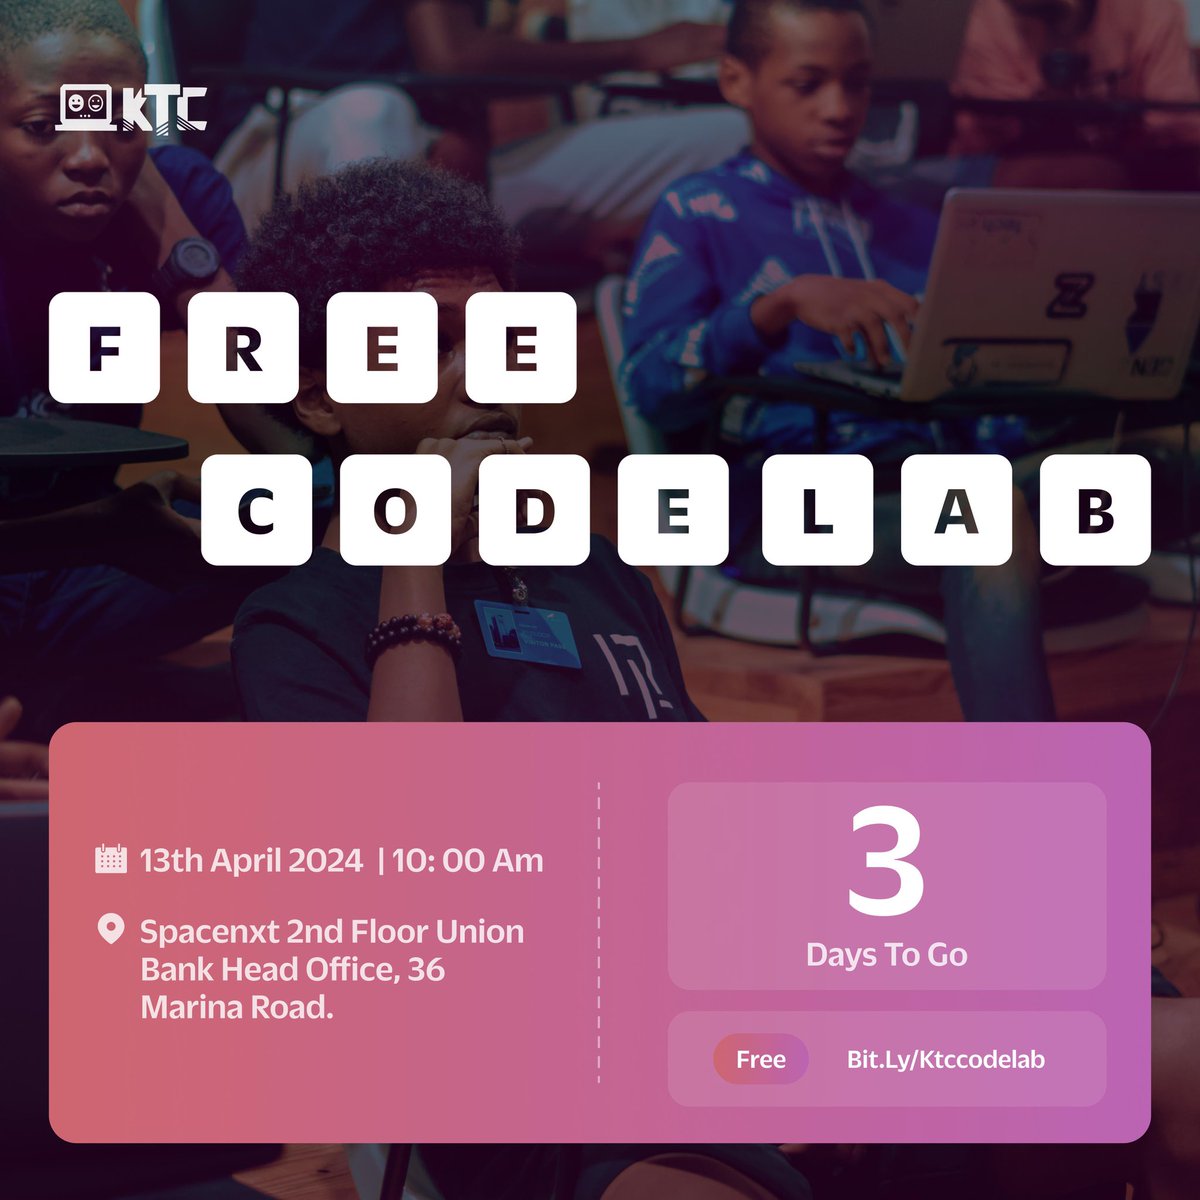 Exciting News! Only 3 days left until the KTC Free Code Lab! 

Don't miss out on this opportunity to learn and grow. 

Hurry and register today to join the KTC Free Code Lab

Click the link below to register👇🏻
bit.ly/ktccodelab

see you there 👋🏻

#kidsintech